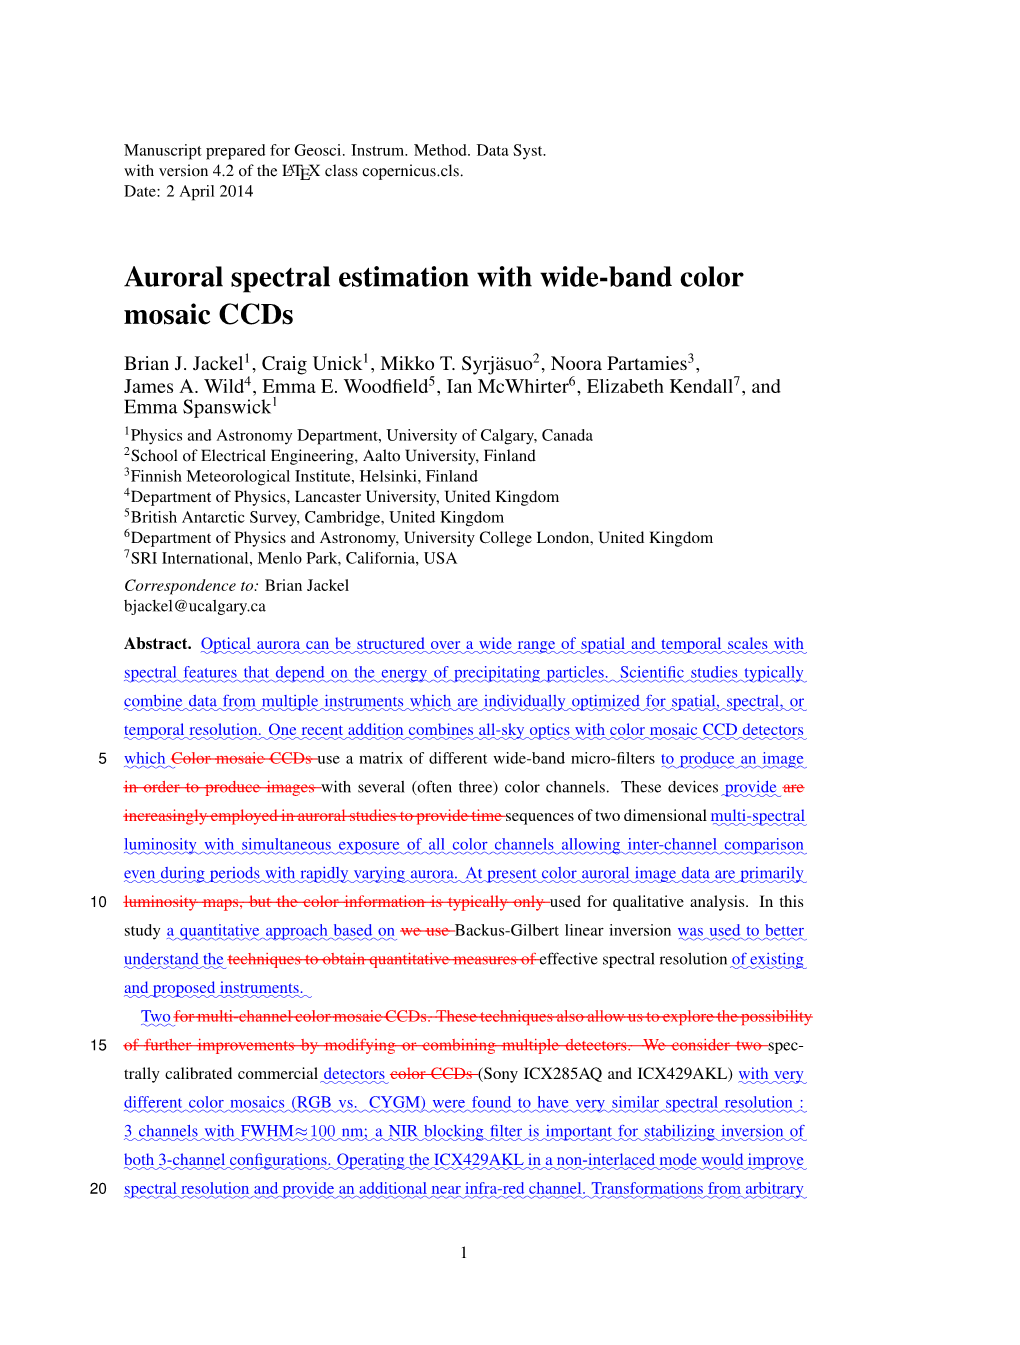 Auroral Spectral Estimation with Wide-Band Color Mosaic Ccds